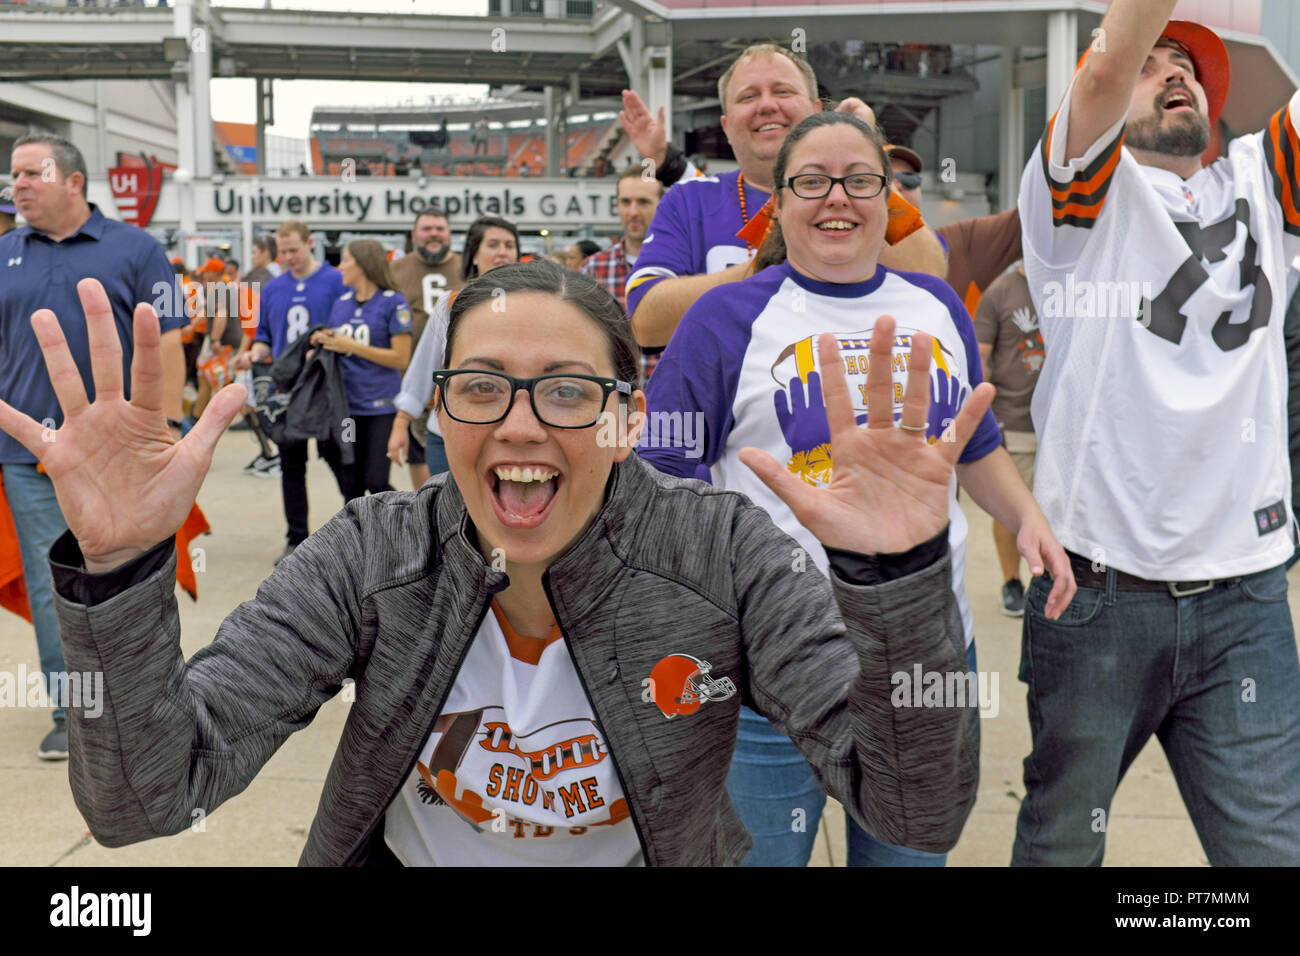 Cleveland, Ohio, USA, 7 Oct, 2018.  Jubilant Cleveland Browns fan celebrates an overtime win over the Baltimore Ravens at FirstEnergy Stadium in Cleveland, Ohio, USA.  The win marks the Browns second this season with the final score breing 12-9.  Credit: Mark Kanning/Alamy Live News. Stock Photo